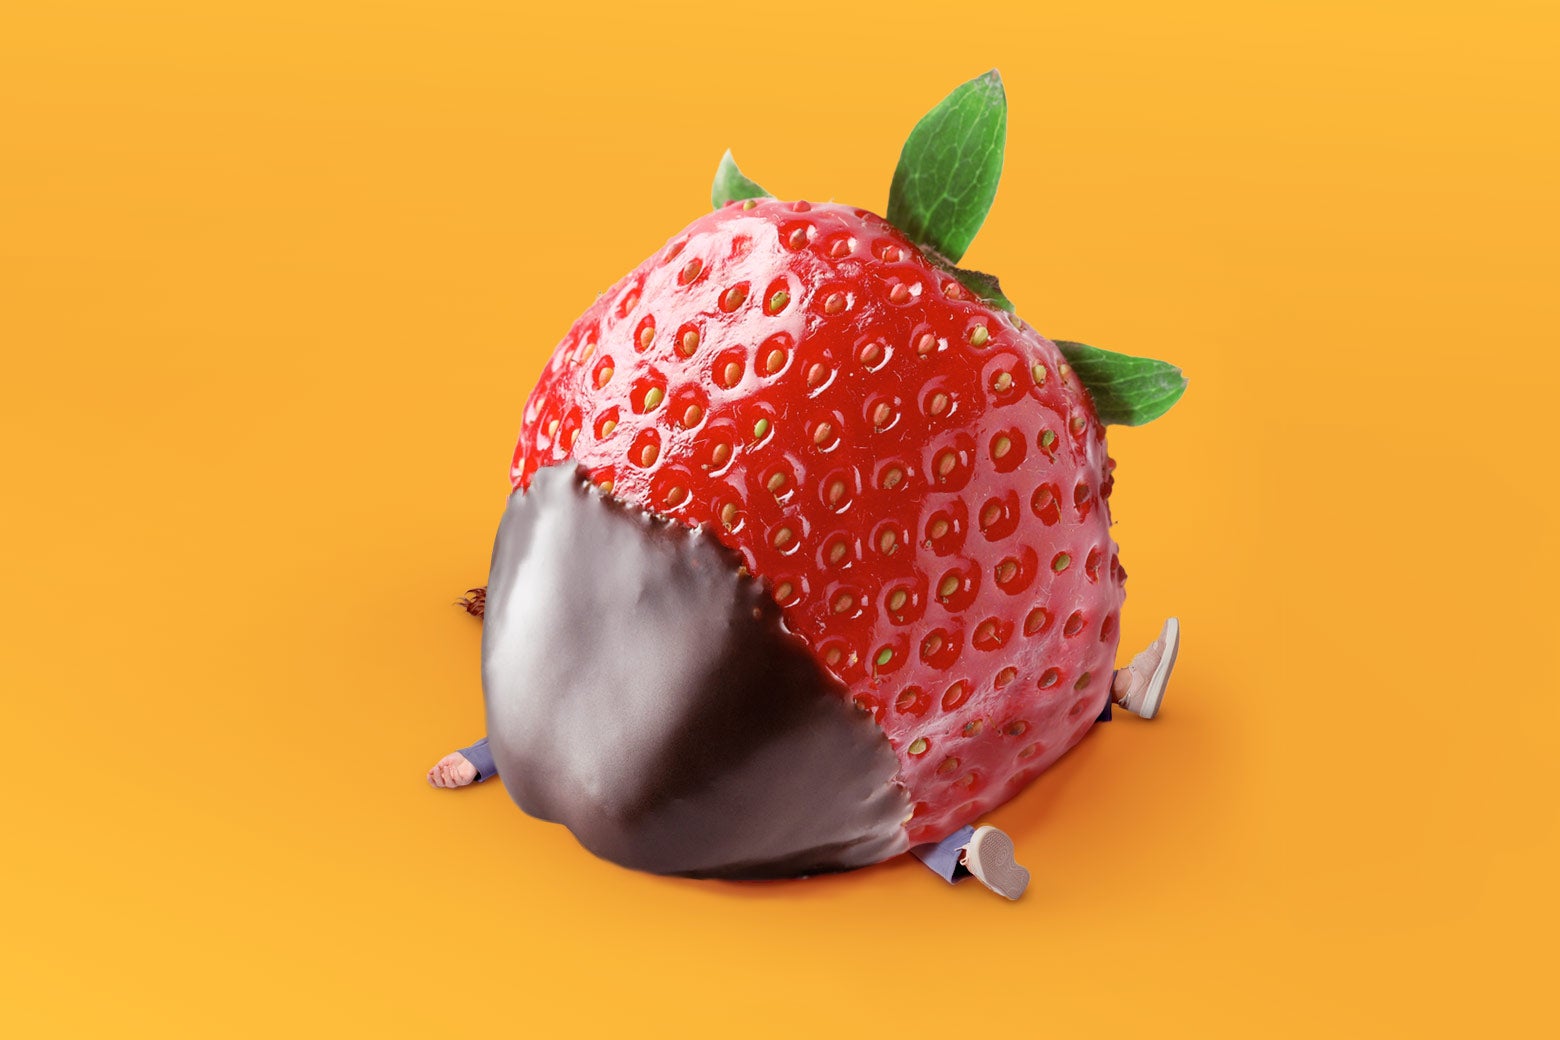 A chocolate-dipped strawberry crushing a person